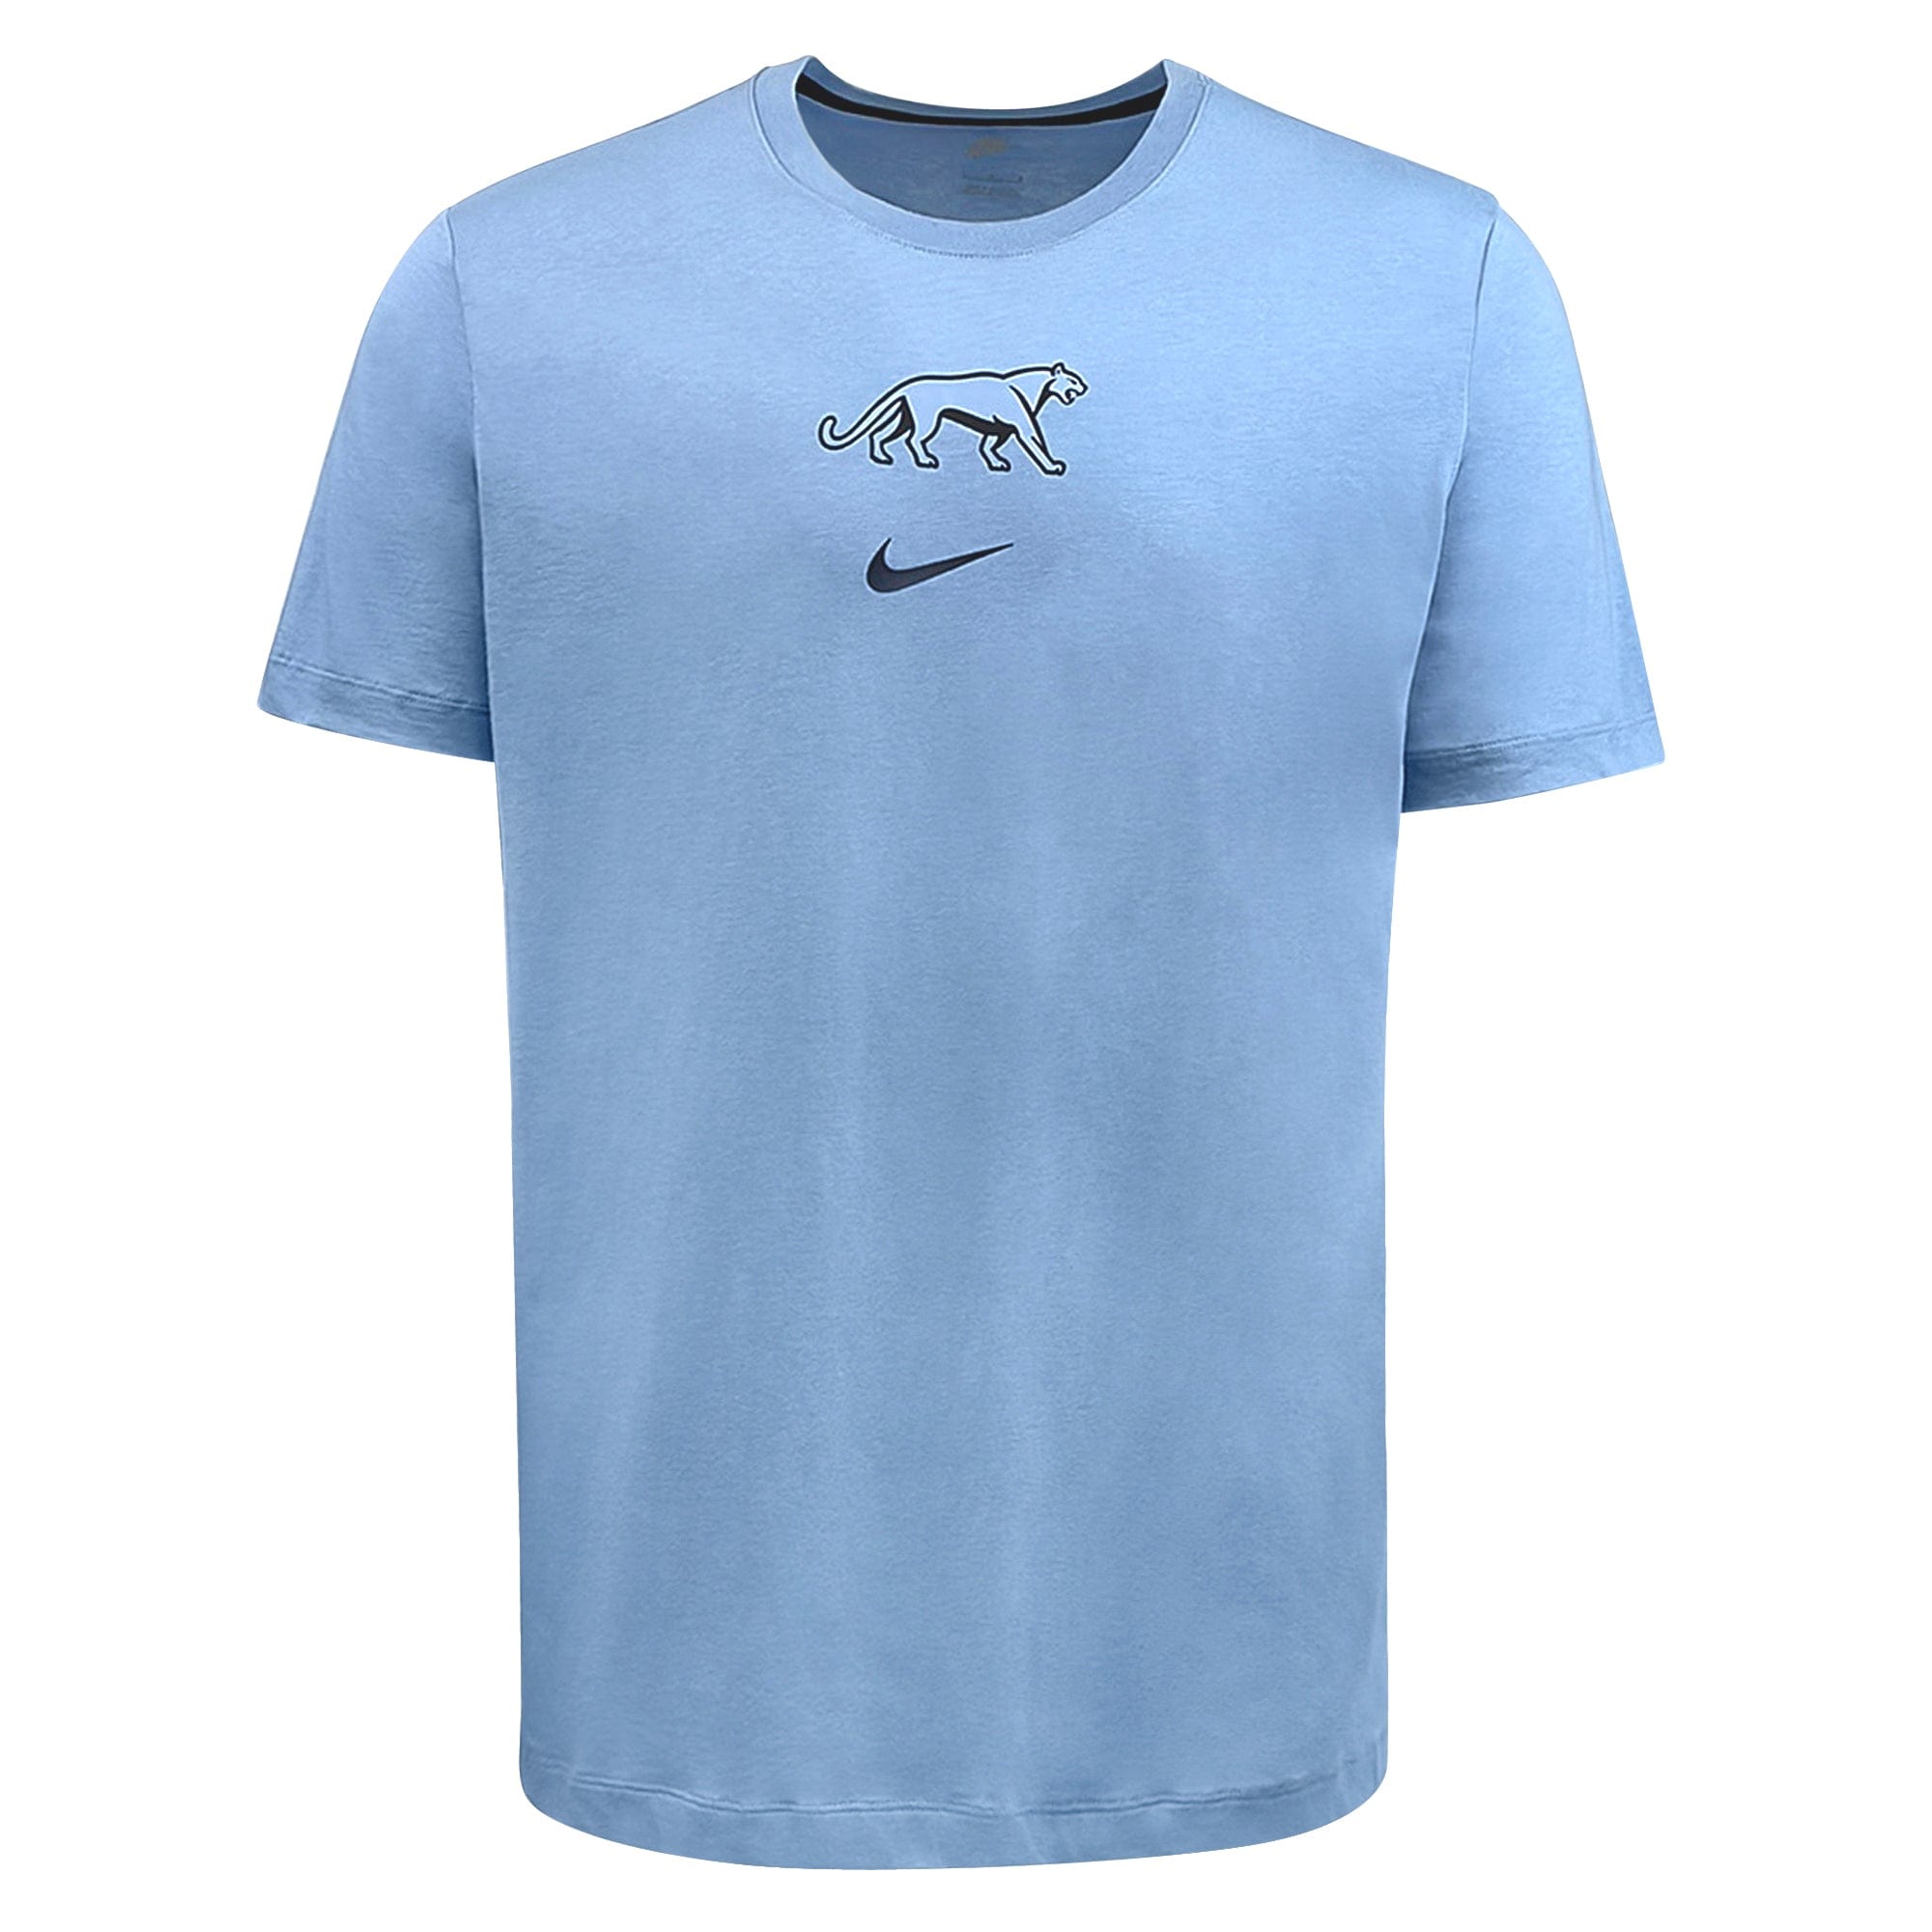 Shop 23/24 | World Nike by Argentina Tee Cotton Pumas Rugby T-shirt Rugby -